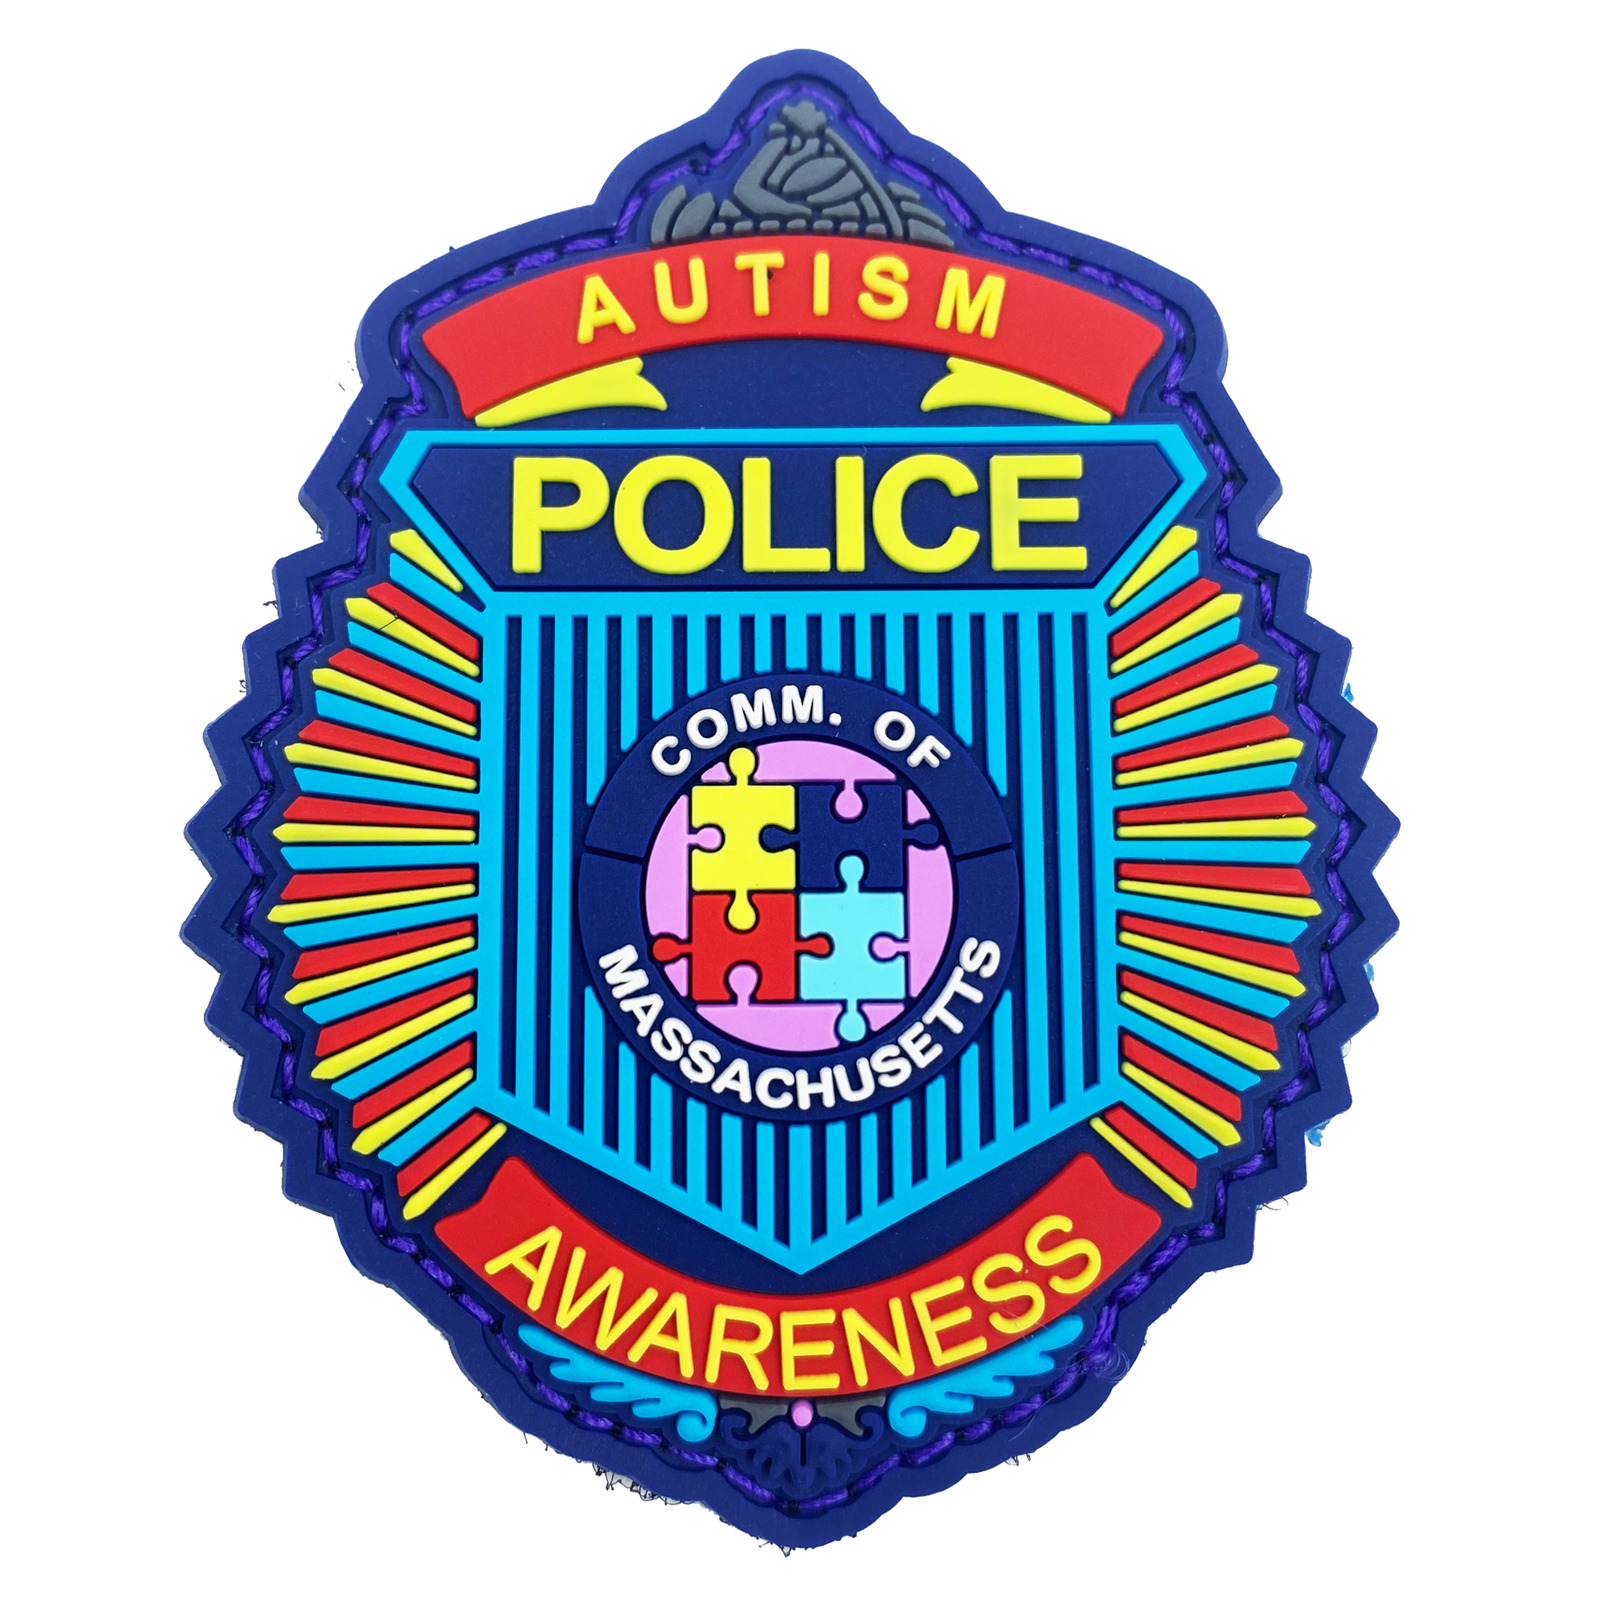 Massachusetts Clamshell Autism Awareness Month Officer Police Patch DL10-13 PAT-